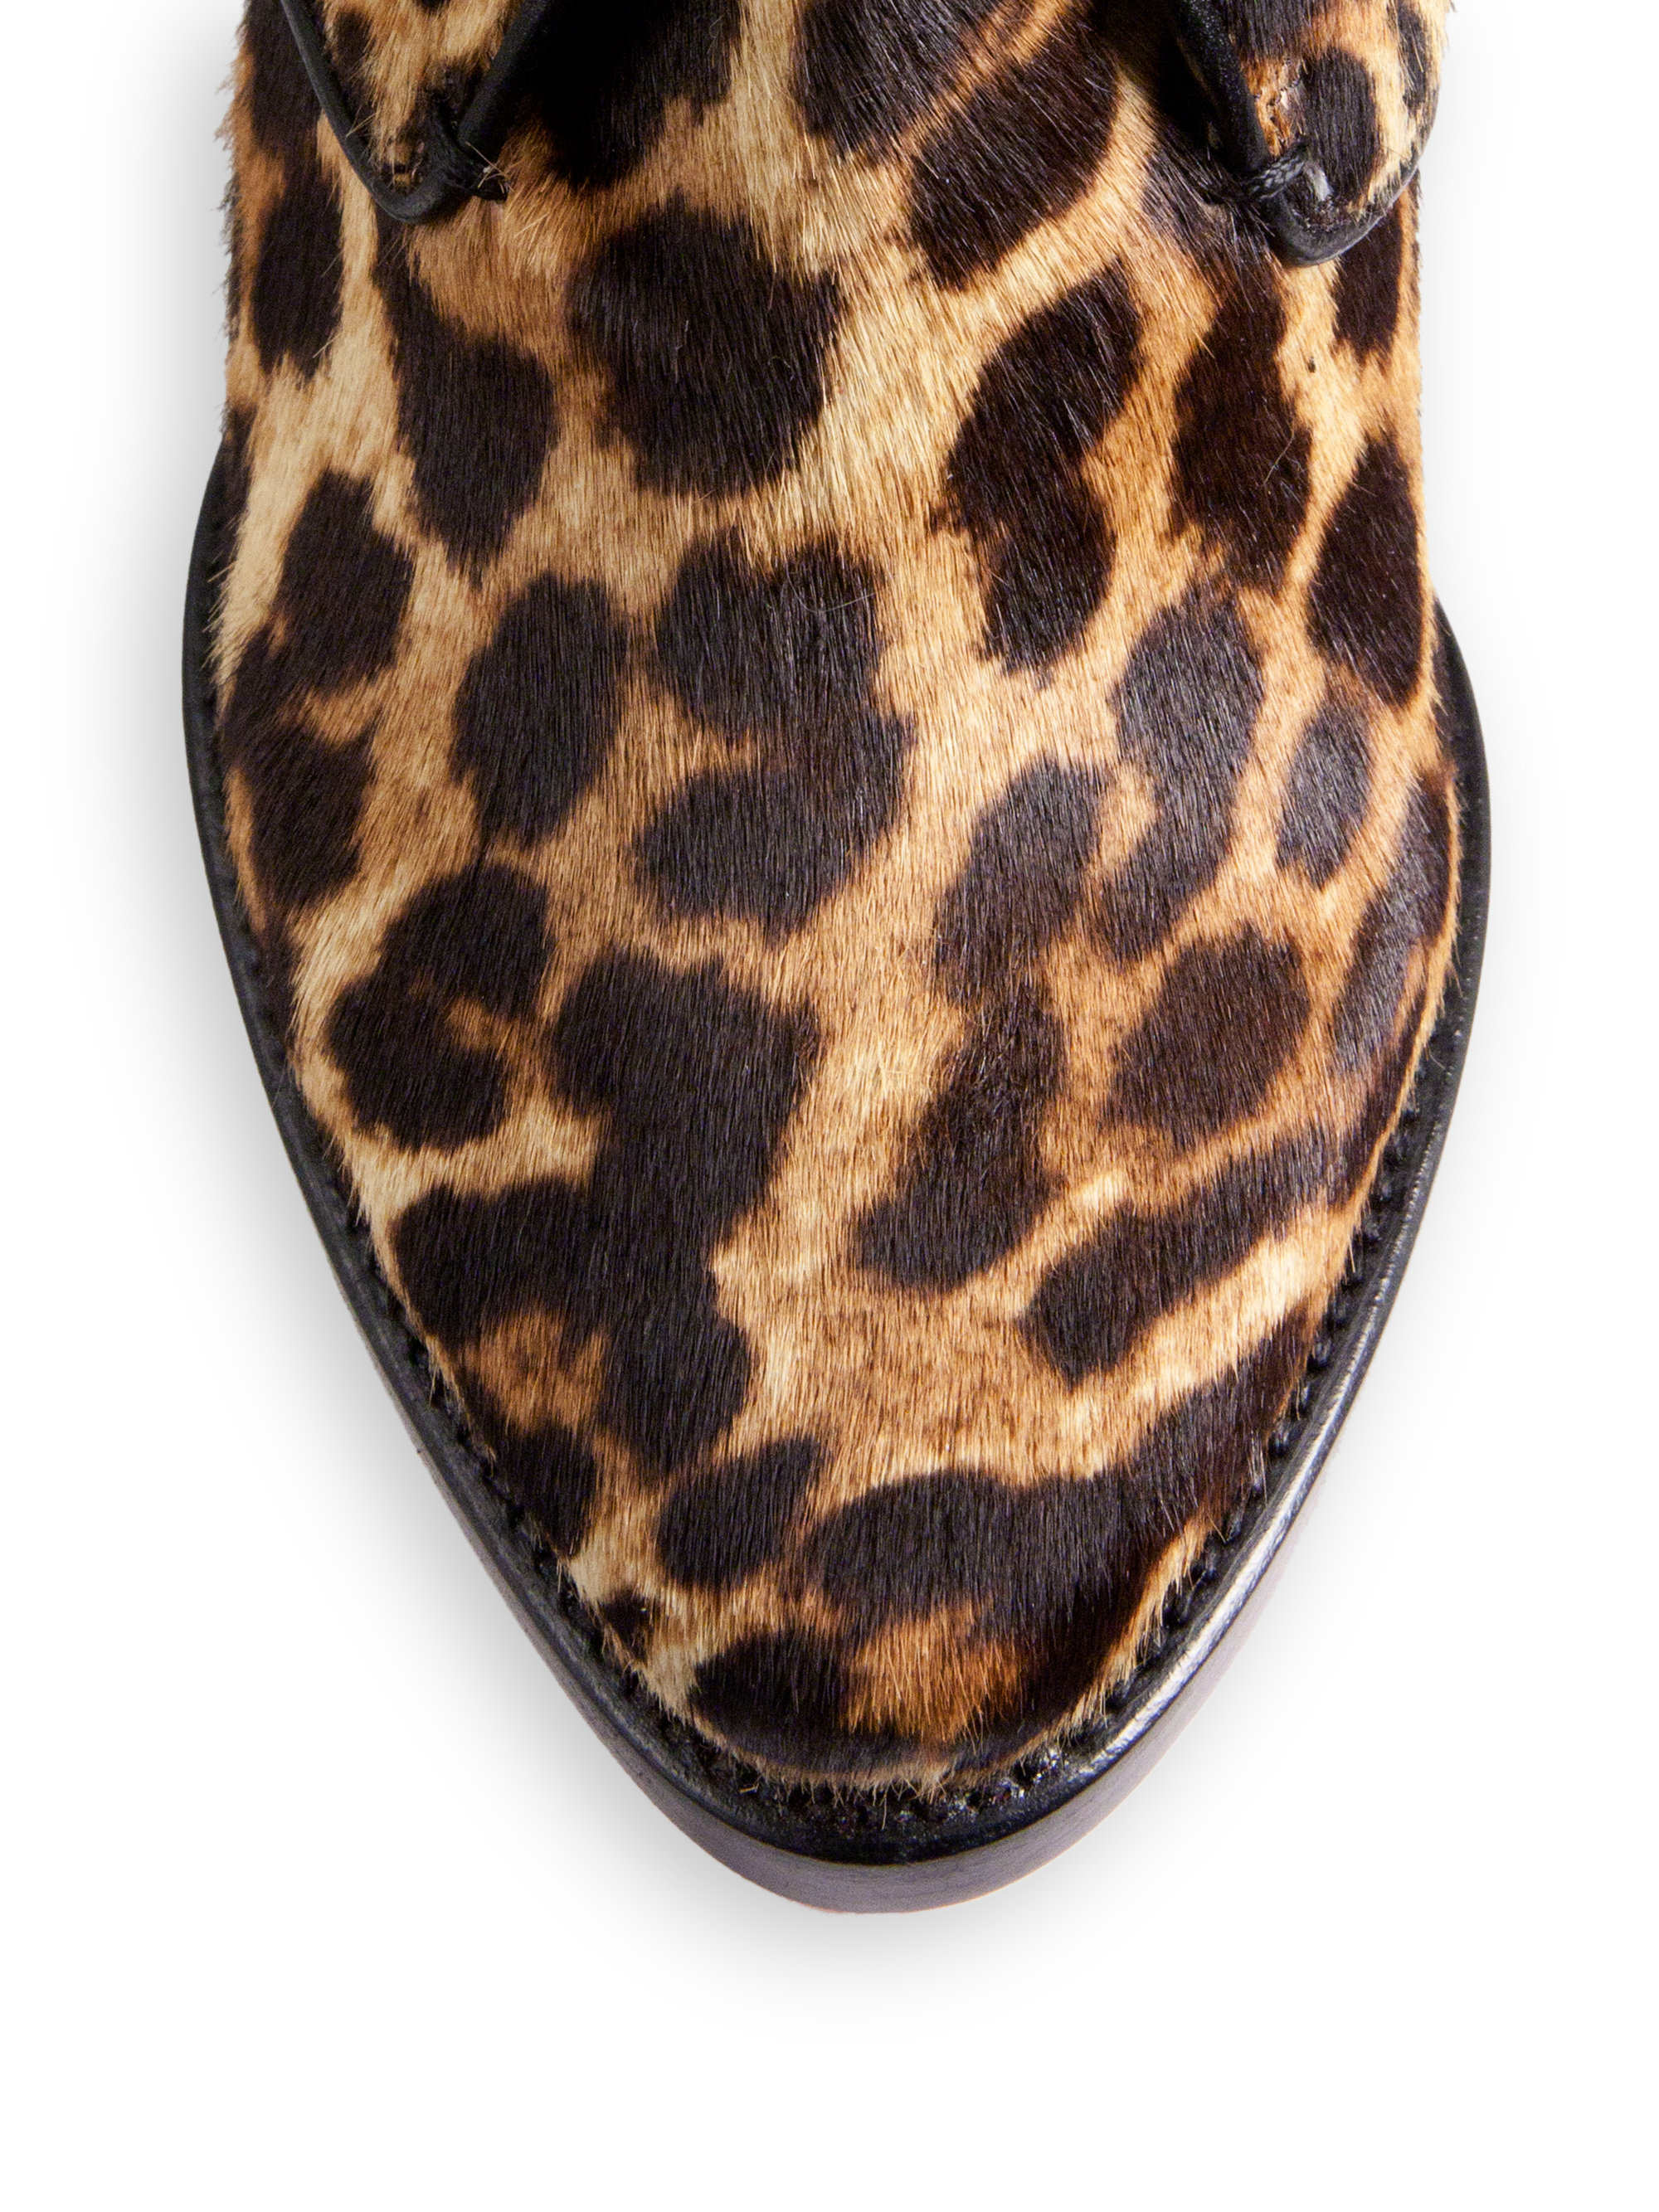 christian louboutin wedge booties Brown and tan ponyhair leopard ...